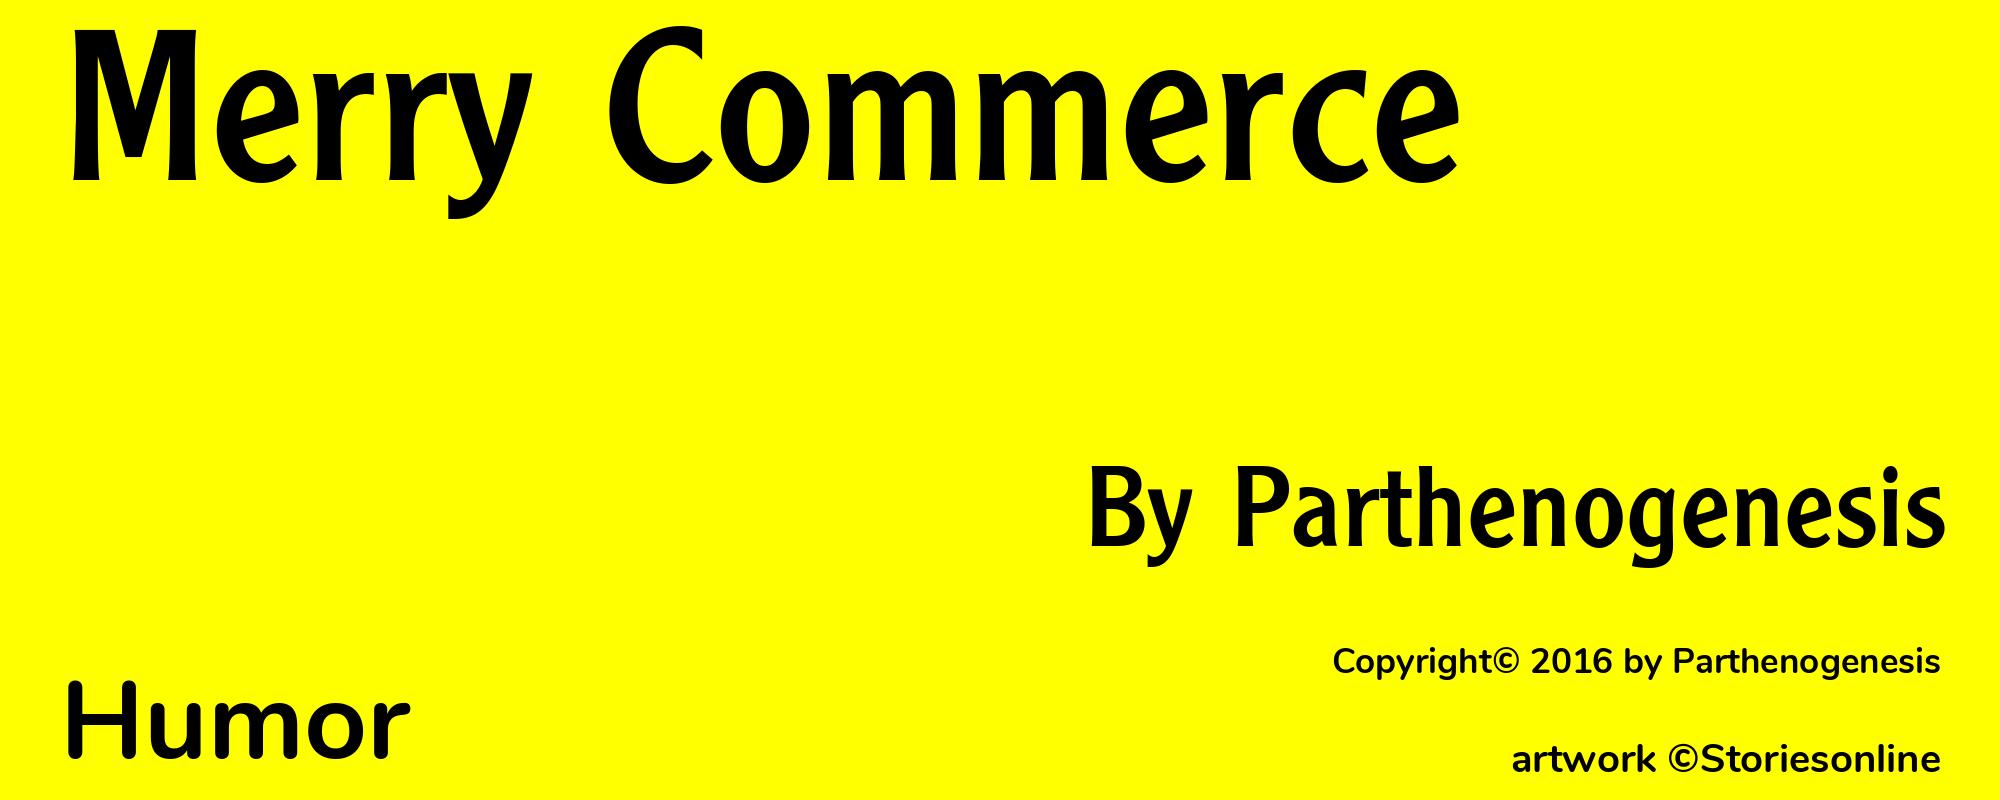 Merry Commerce - Cover